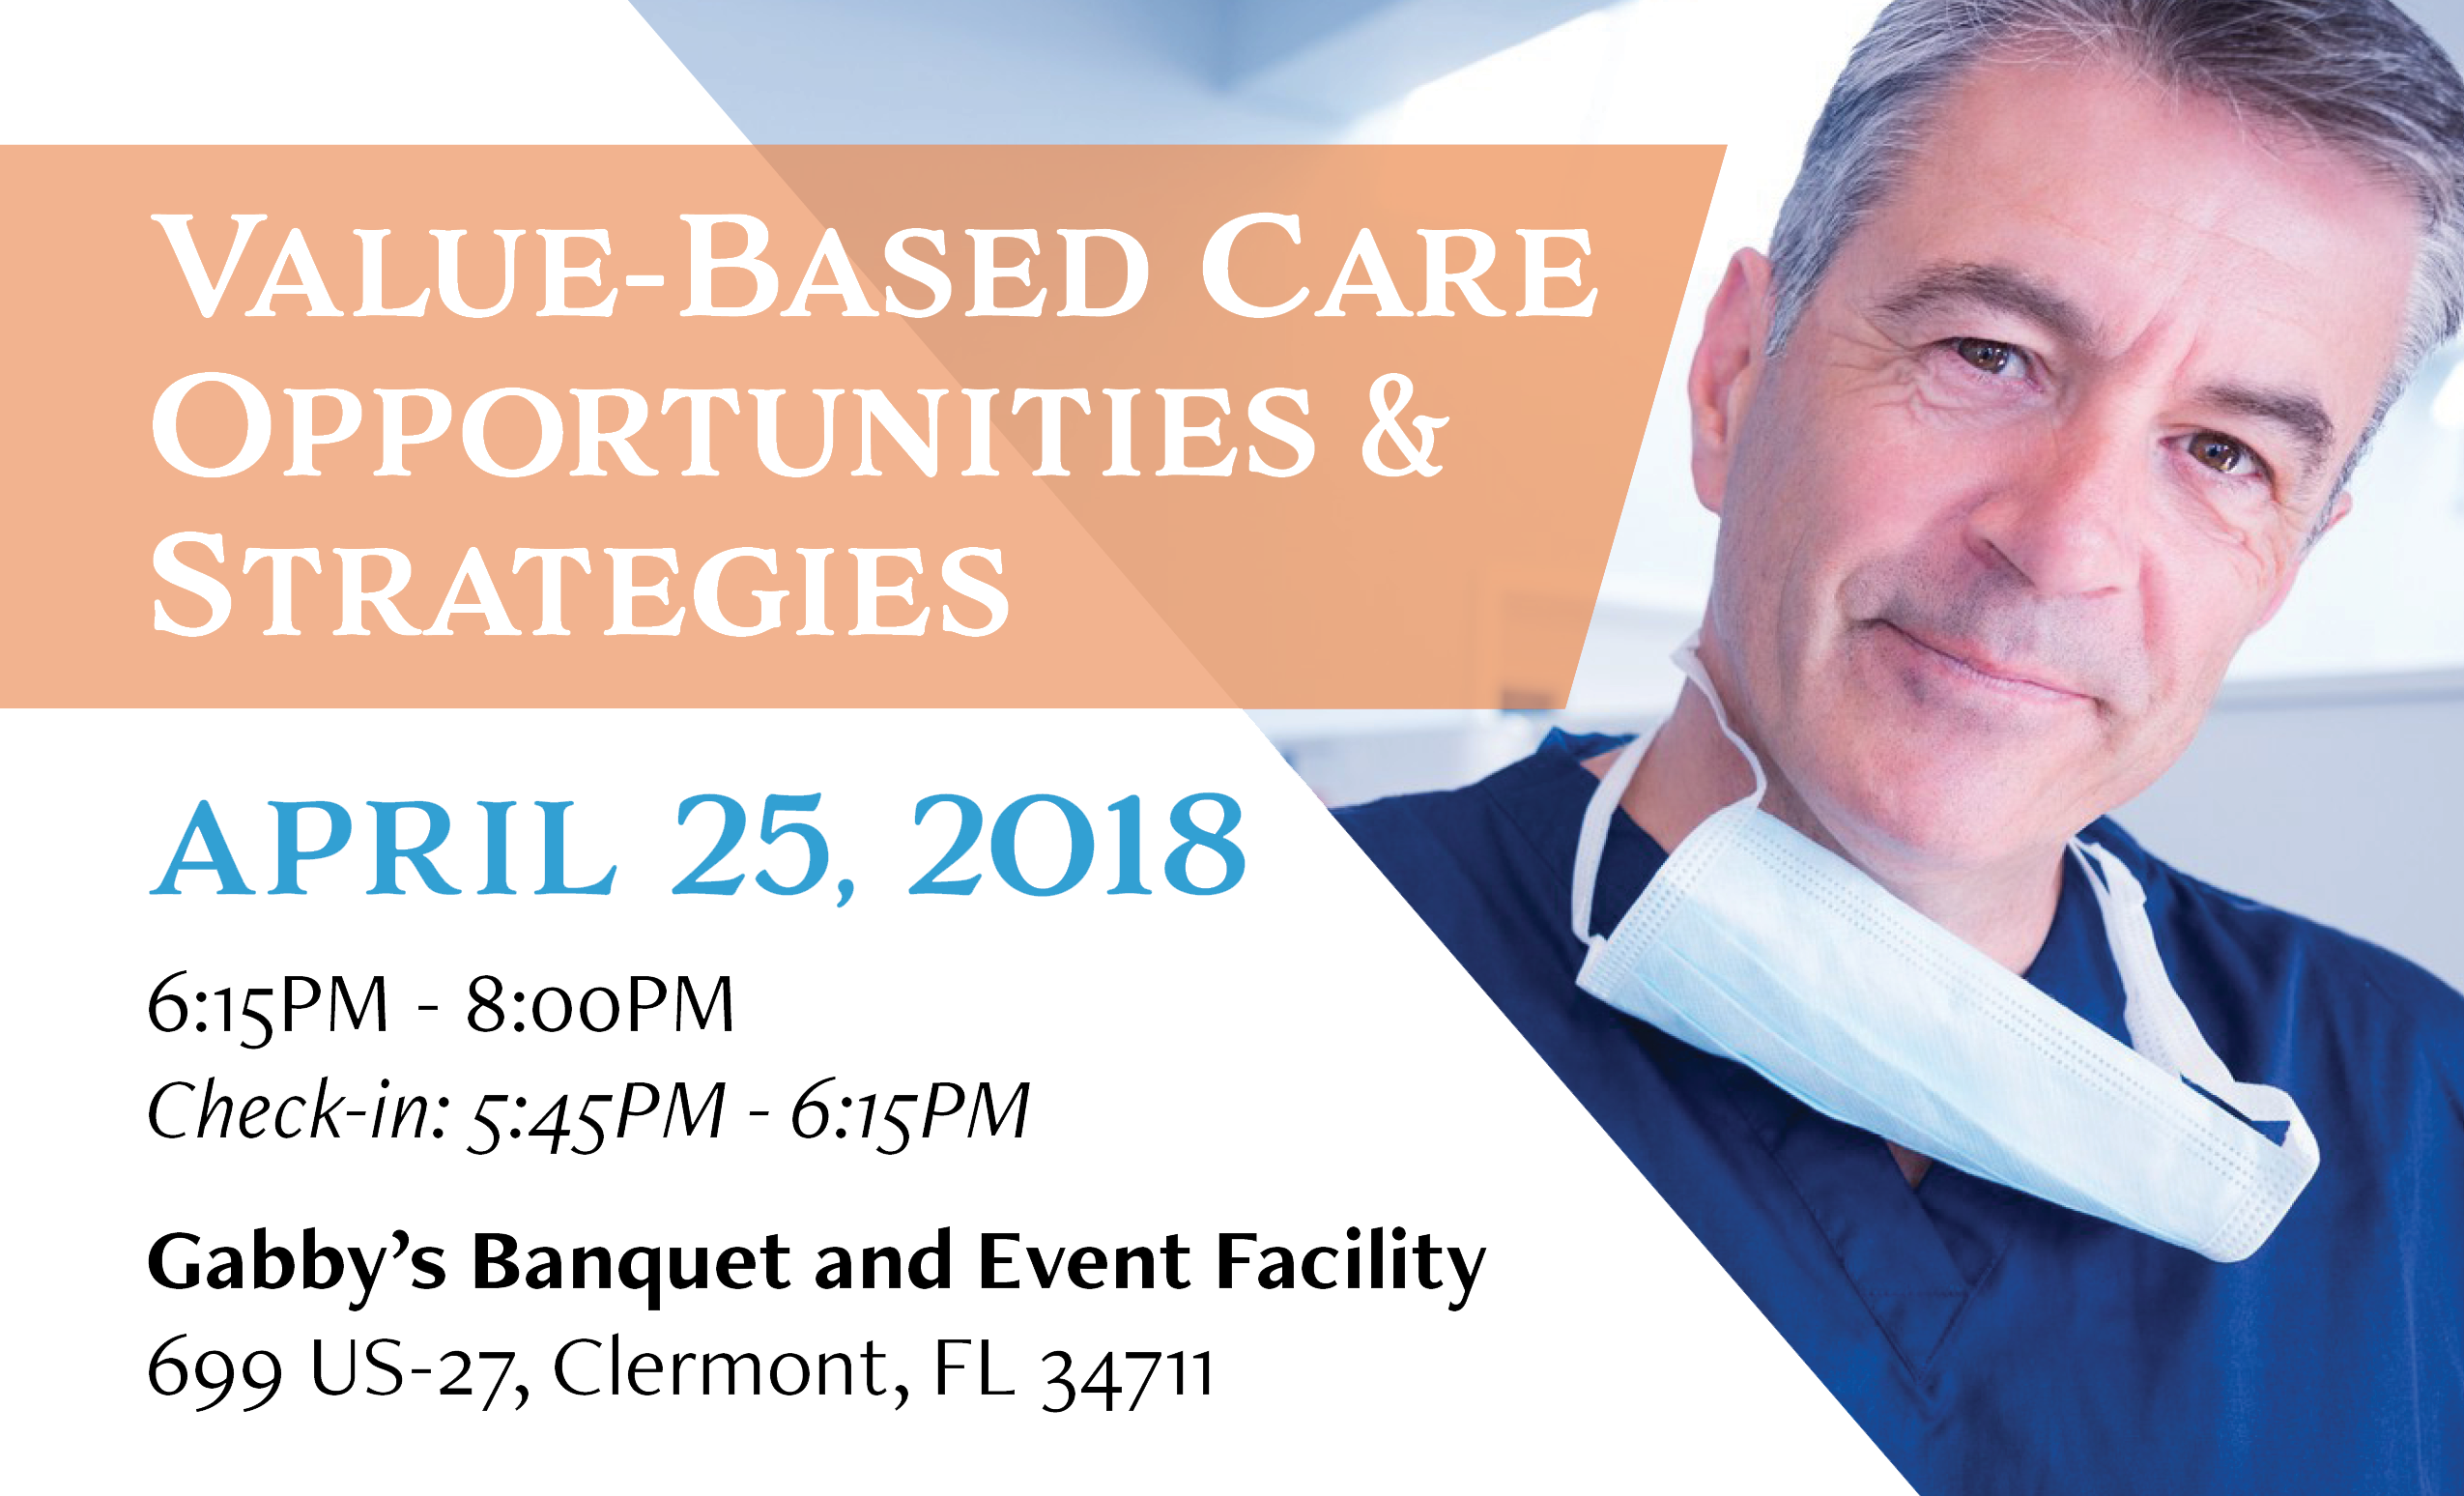 Value-Based Care Opportunities & Strategies: Apr 25, 2018